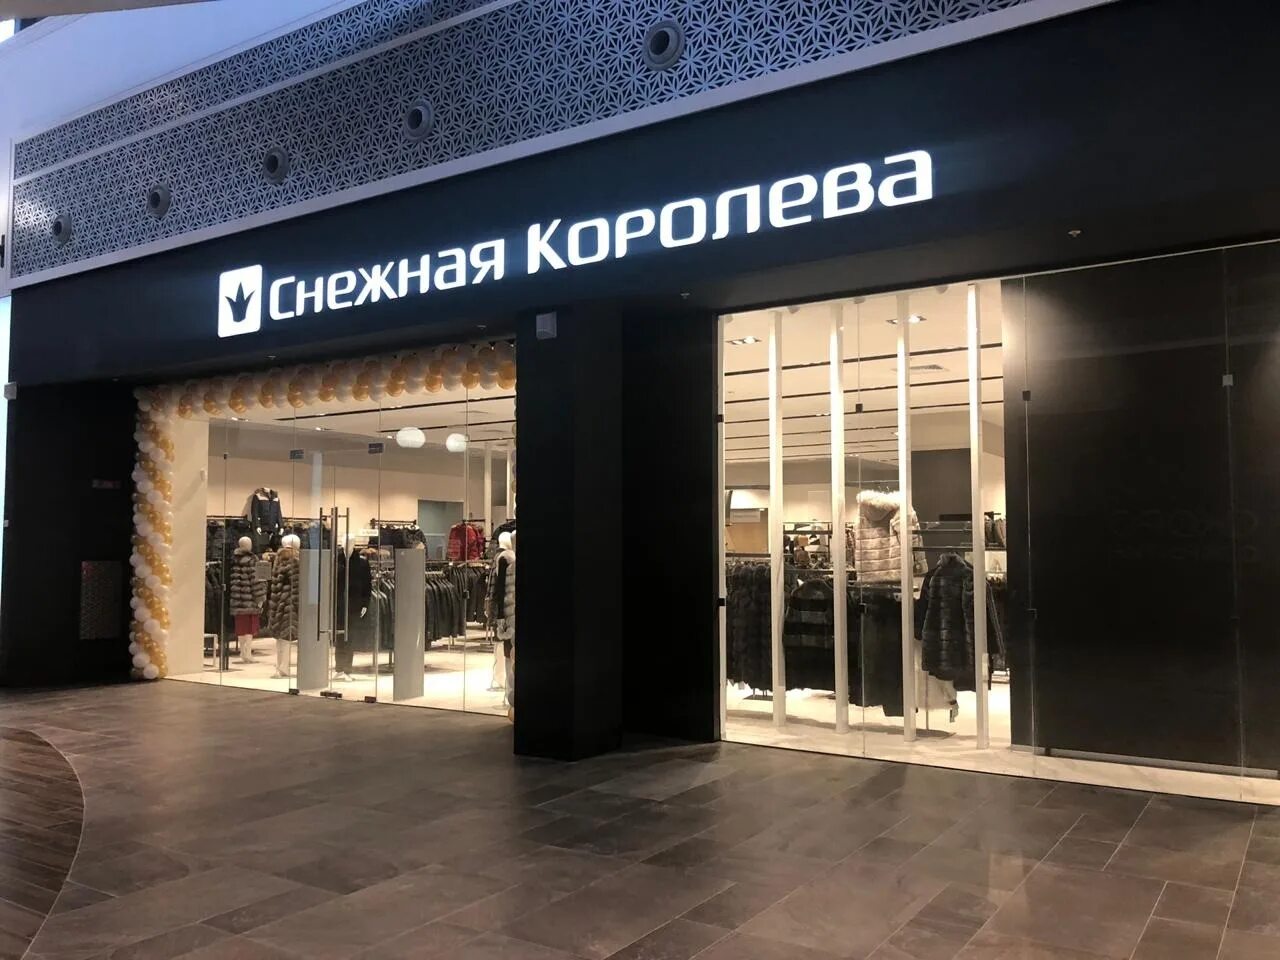 Outlet одежда. Henderson Калининград. Хендерсон Outlet. Outlet Екатеринбург. Хендерсон аутлет Мытищи.